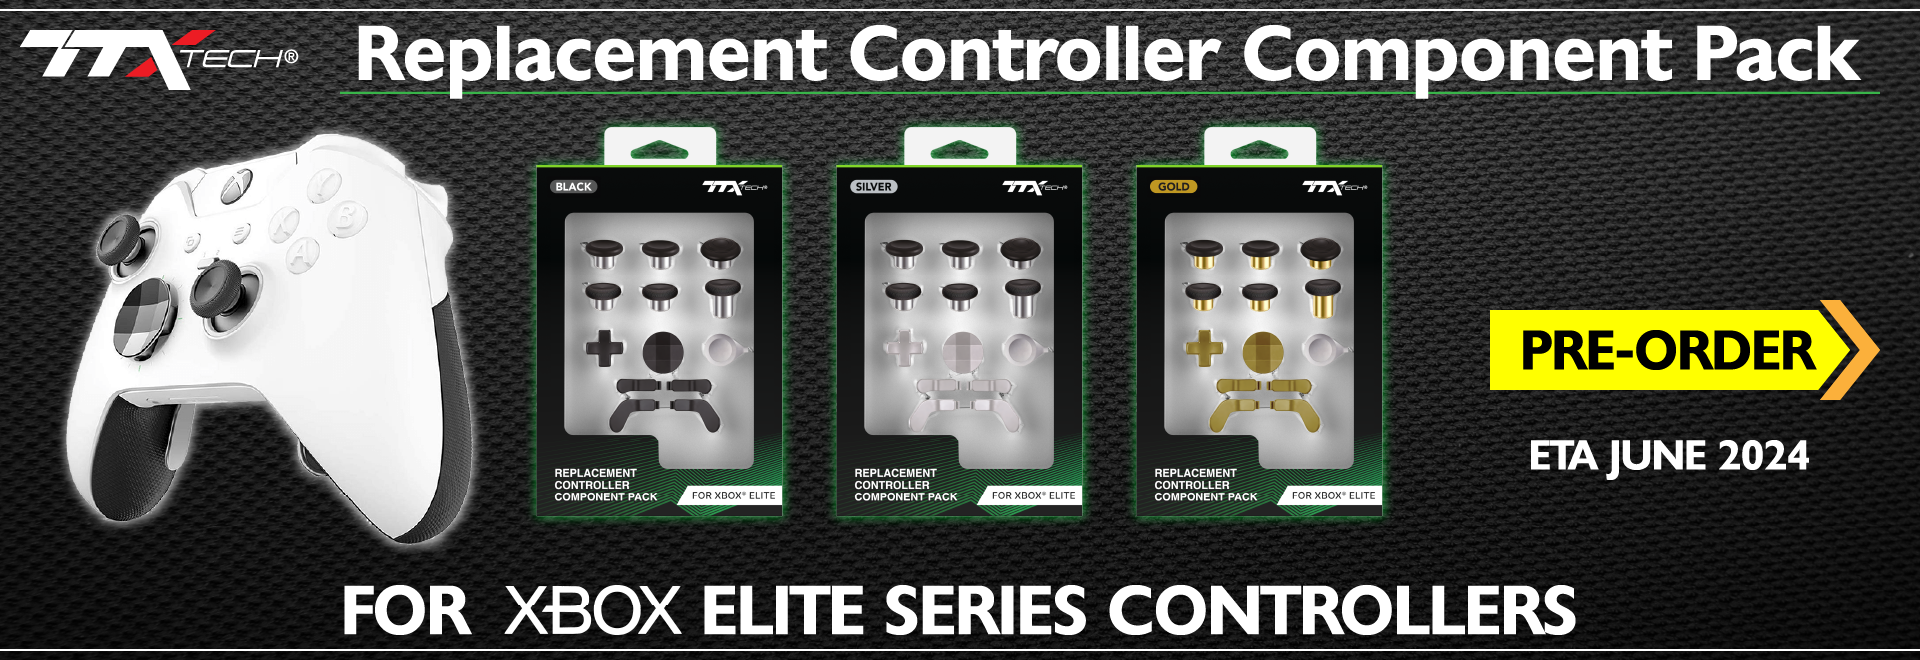 TTX Tech Replacement Controller Component Pack - Pre-Order